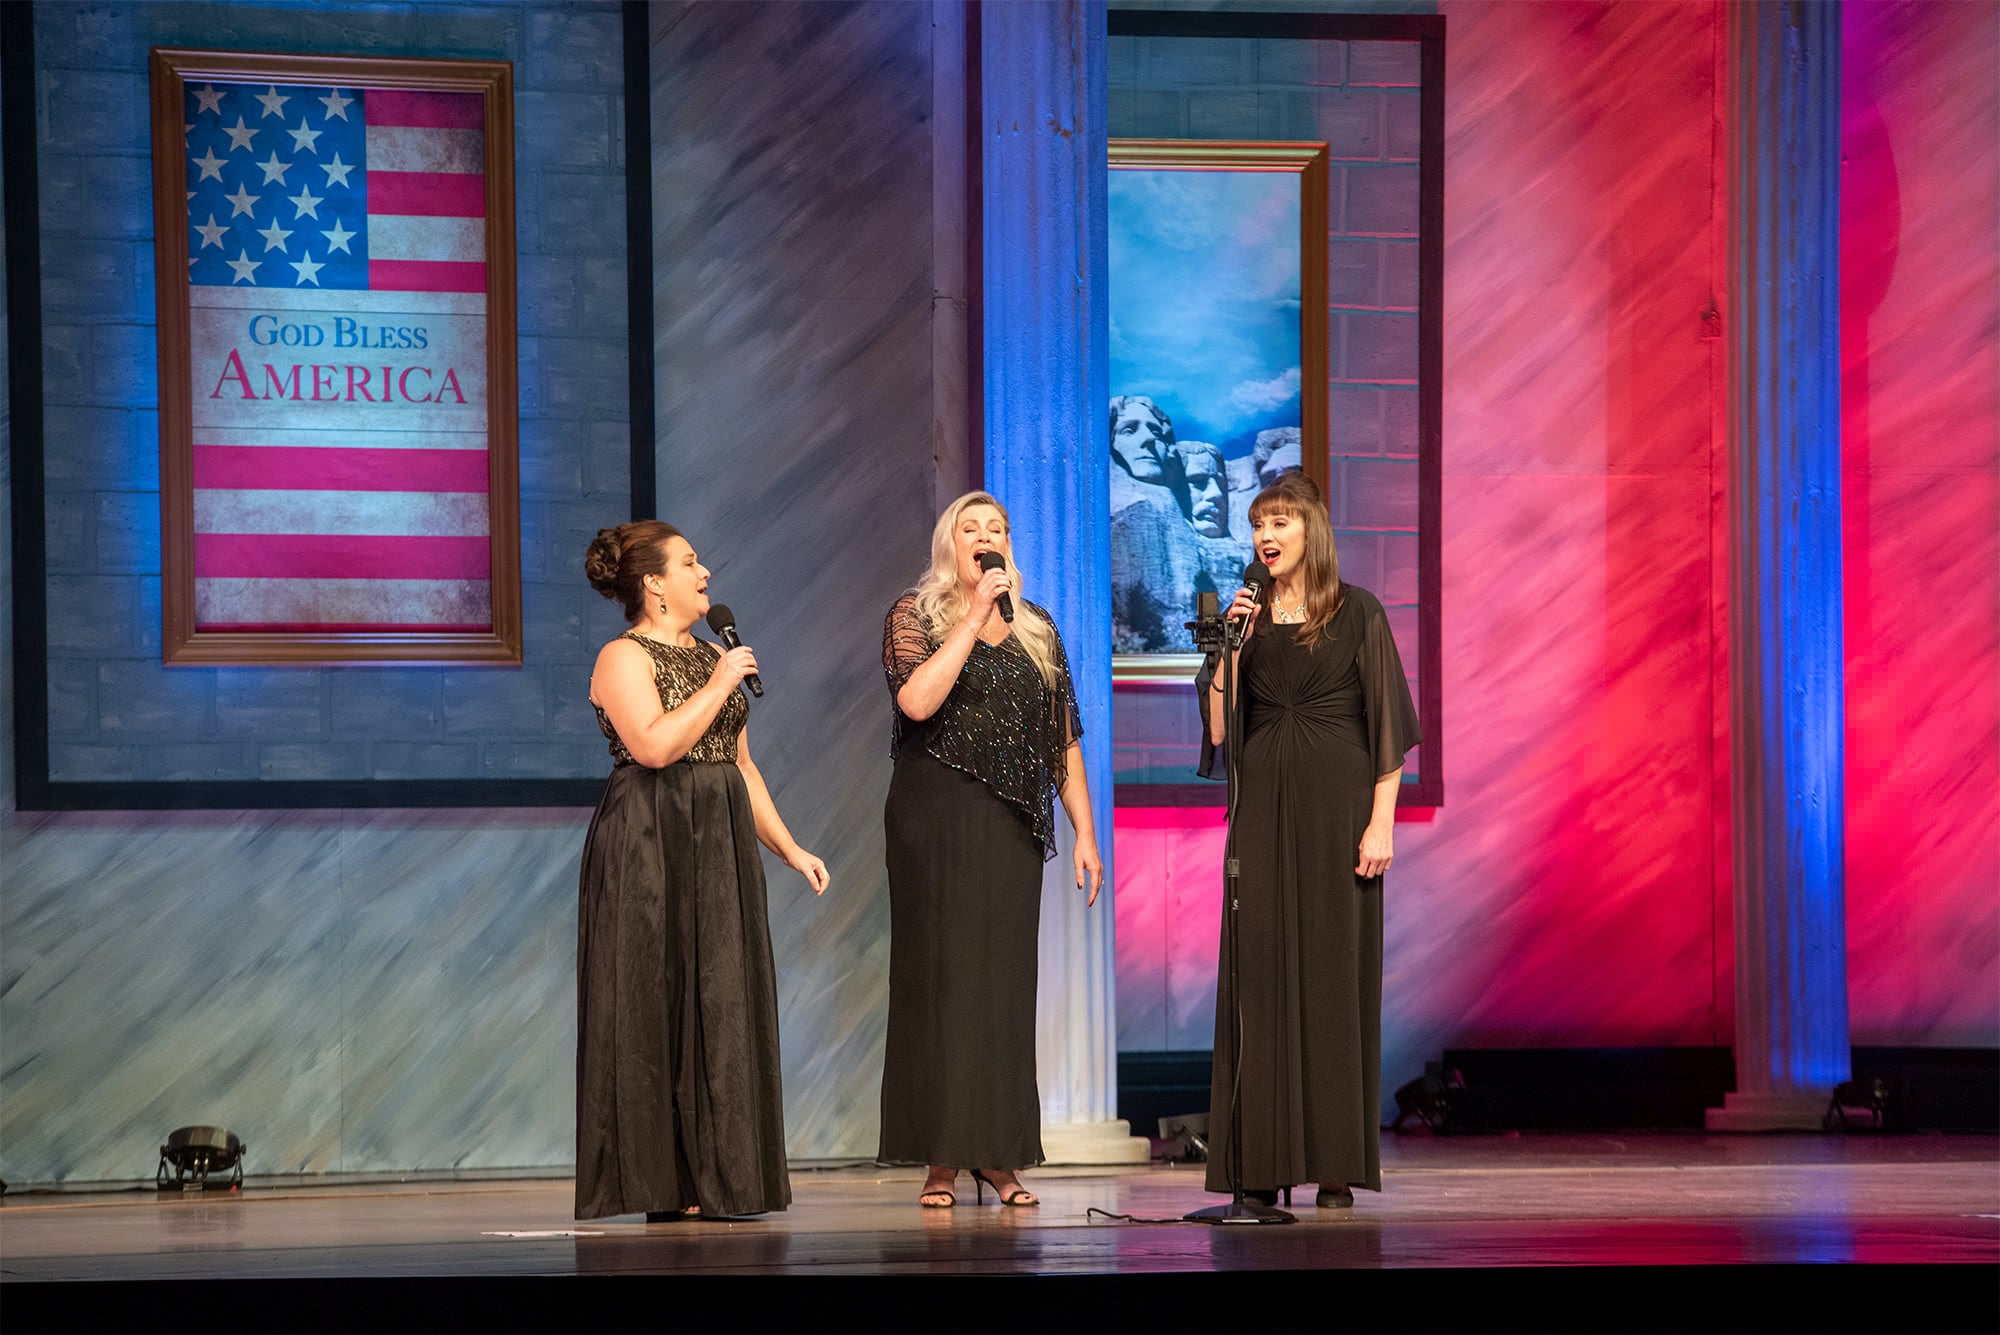 Female Liberty Voices singers wearing black dresses and singing together.